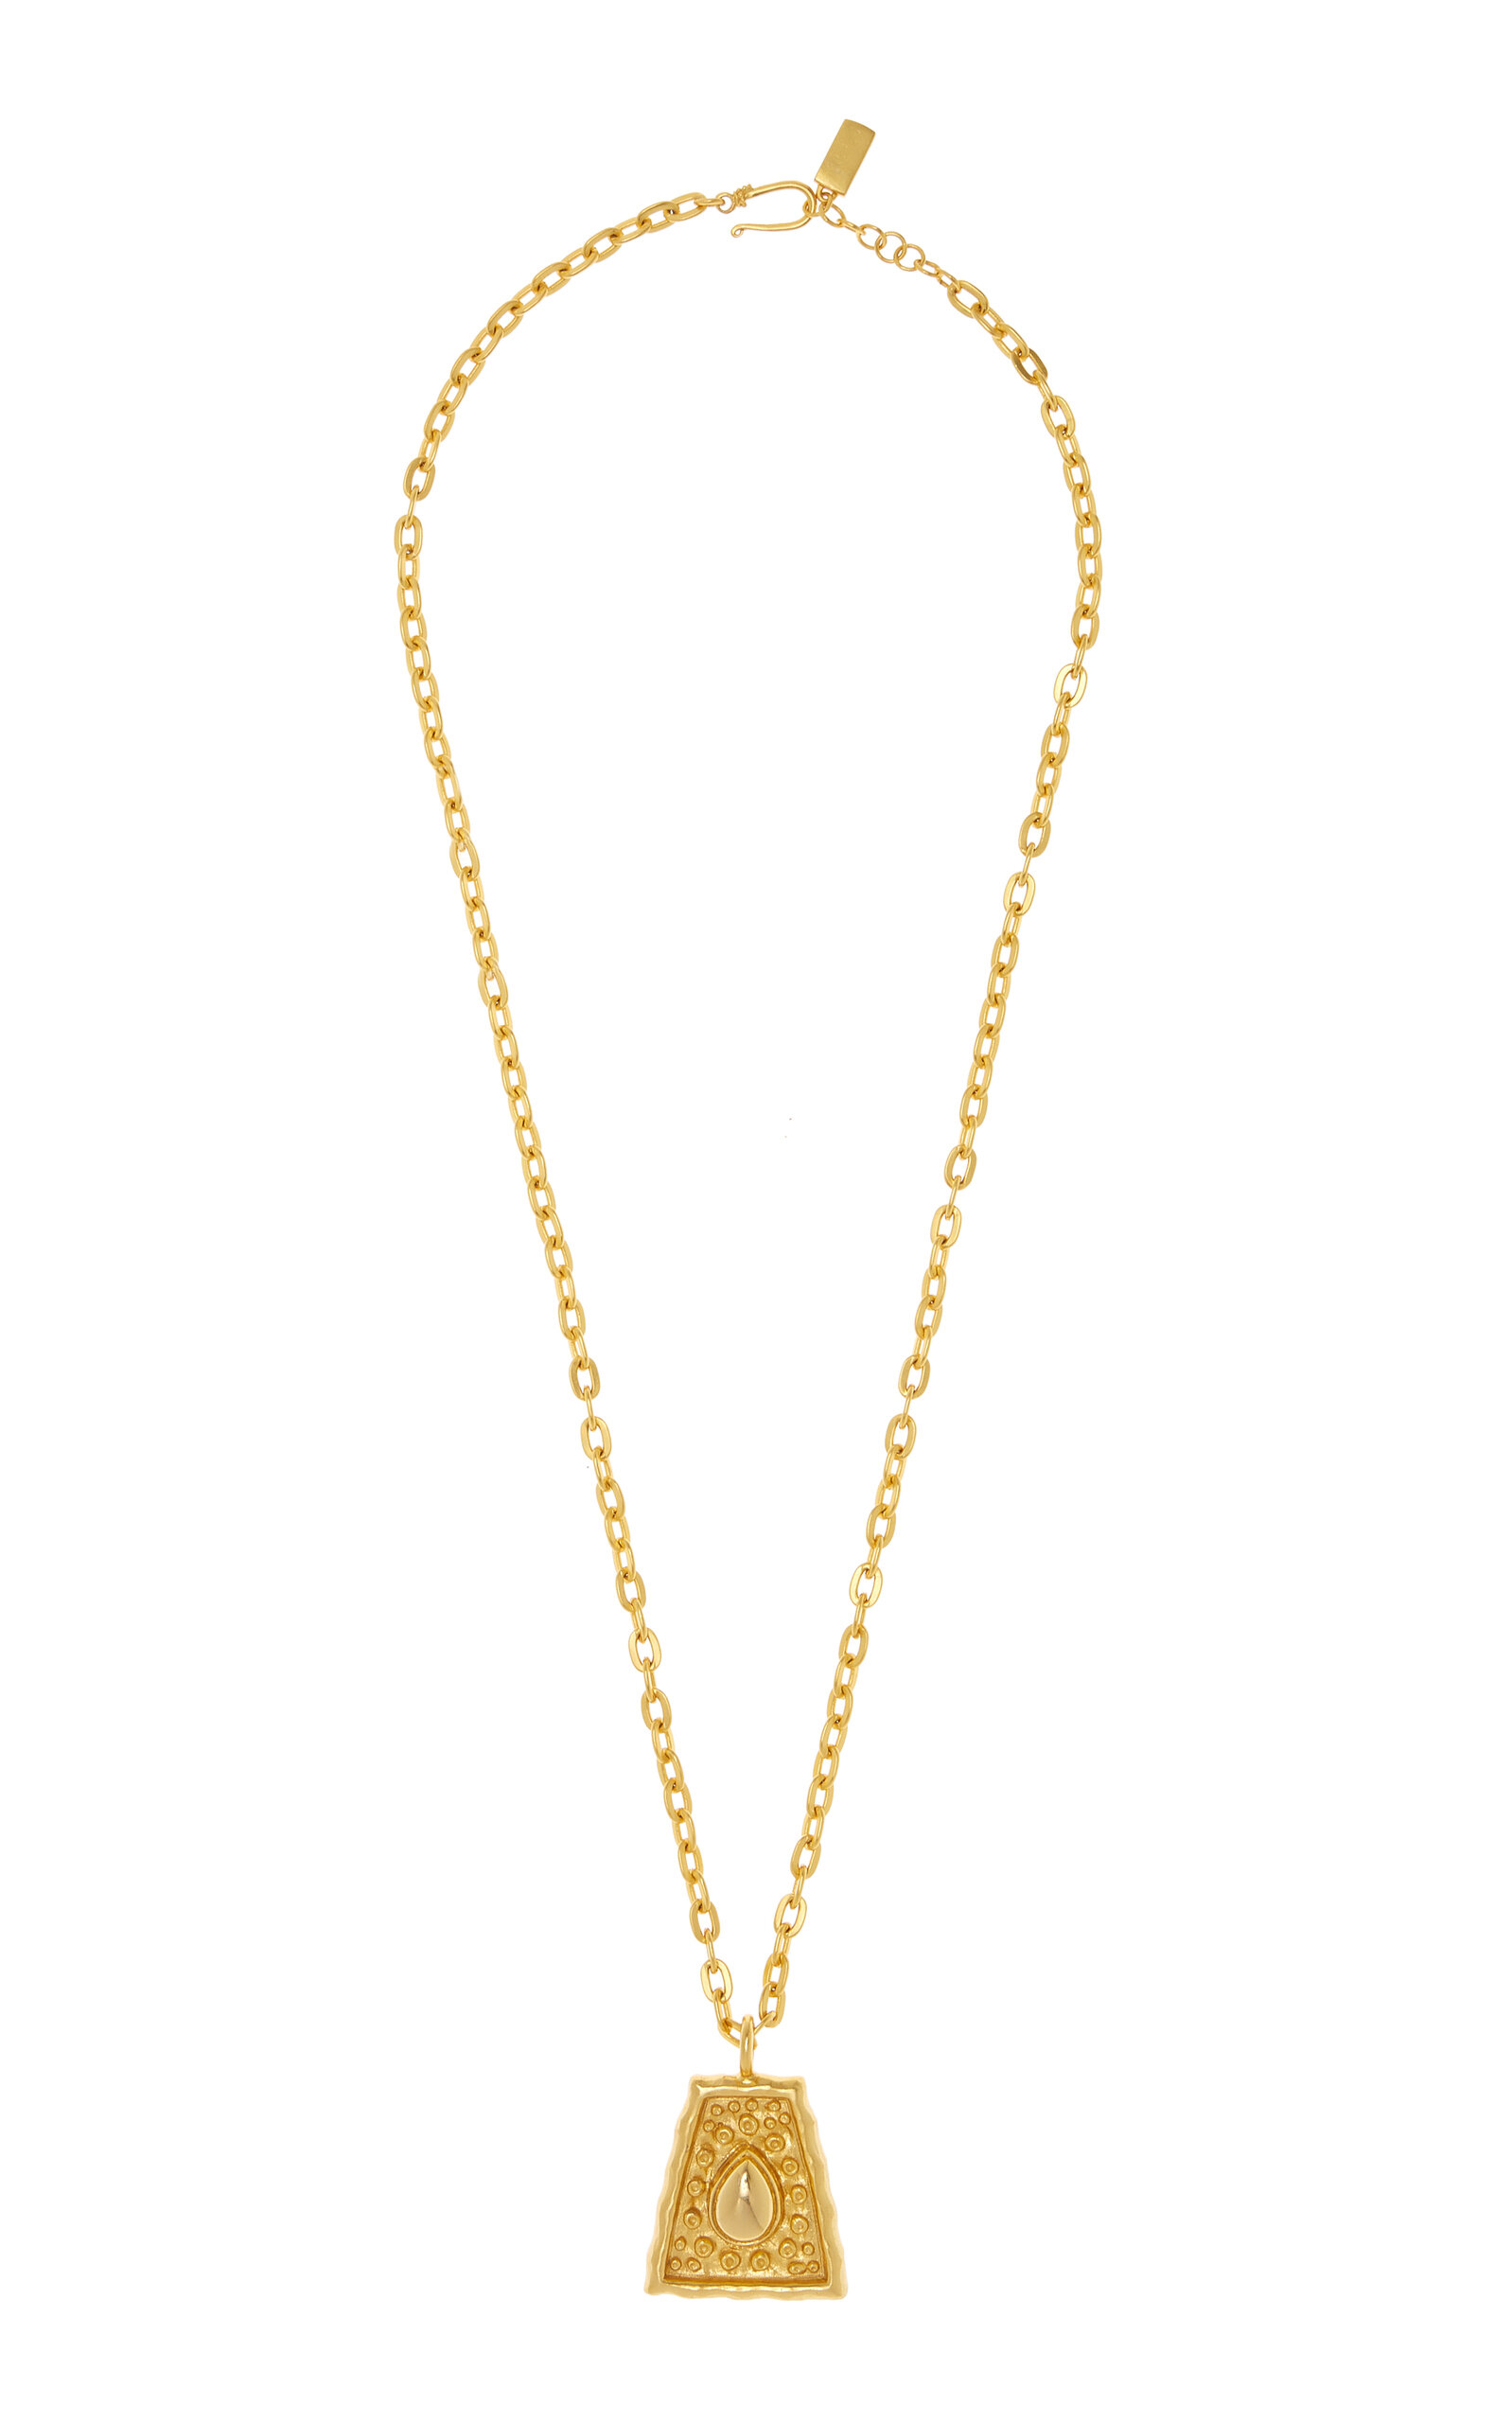 Mayan 24K Gold-Plated Chain Necklace